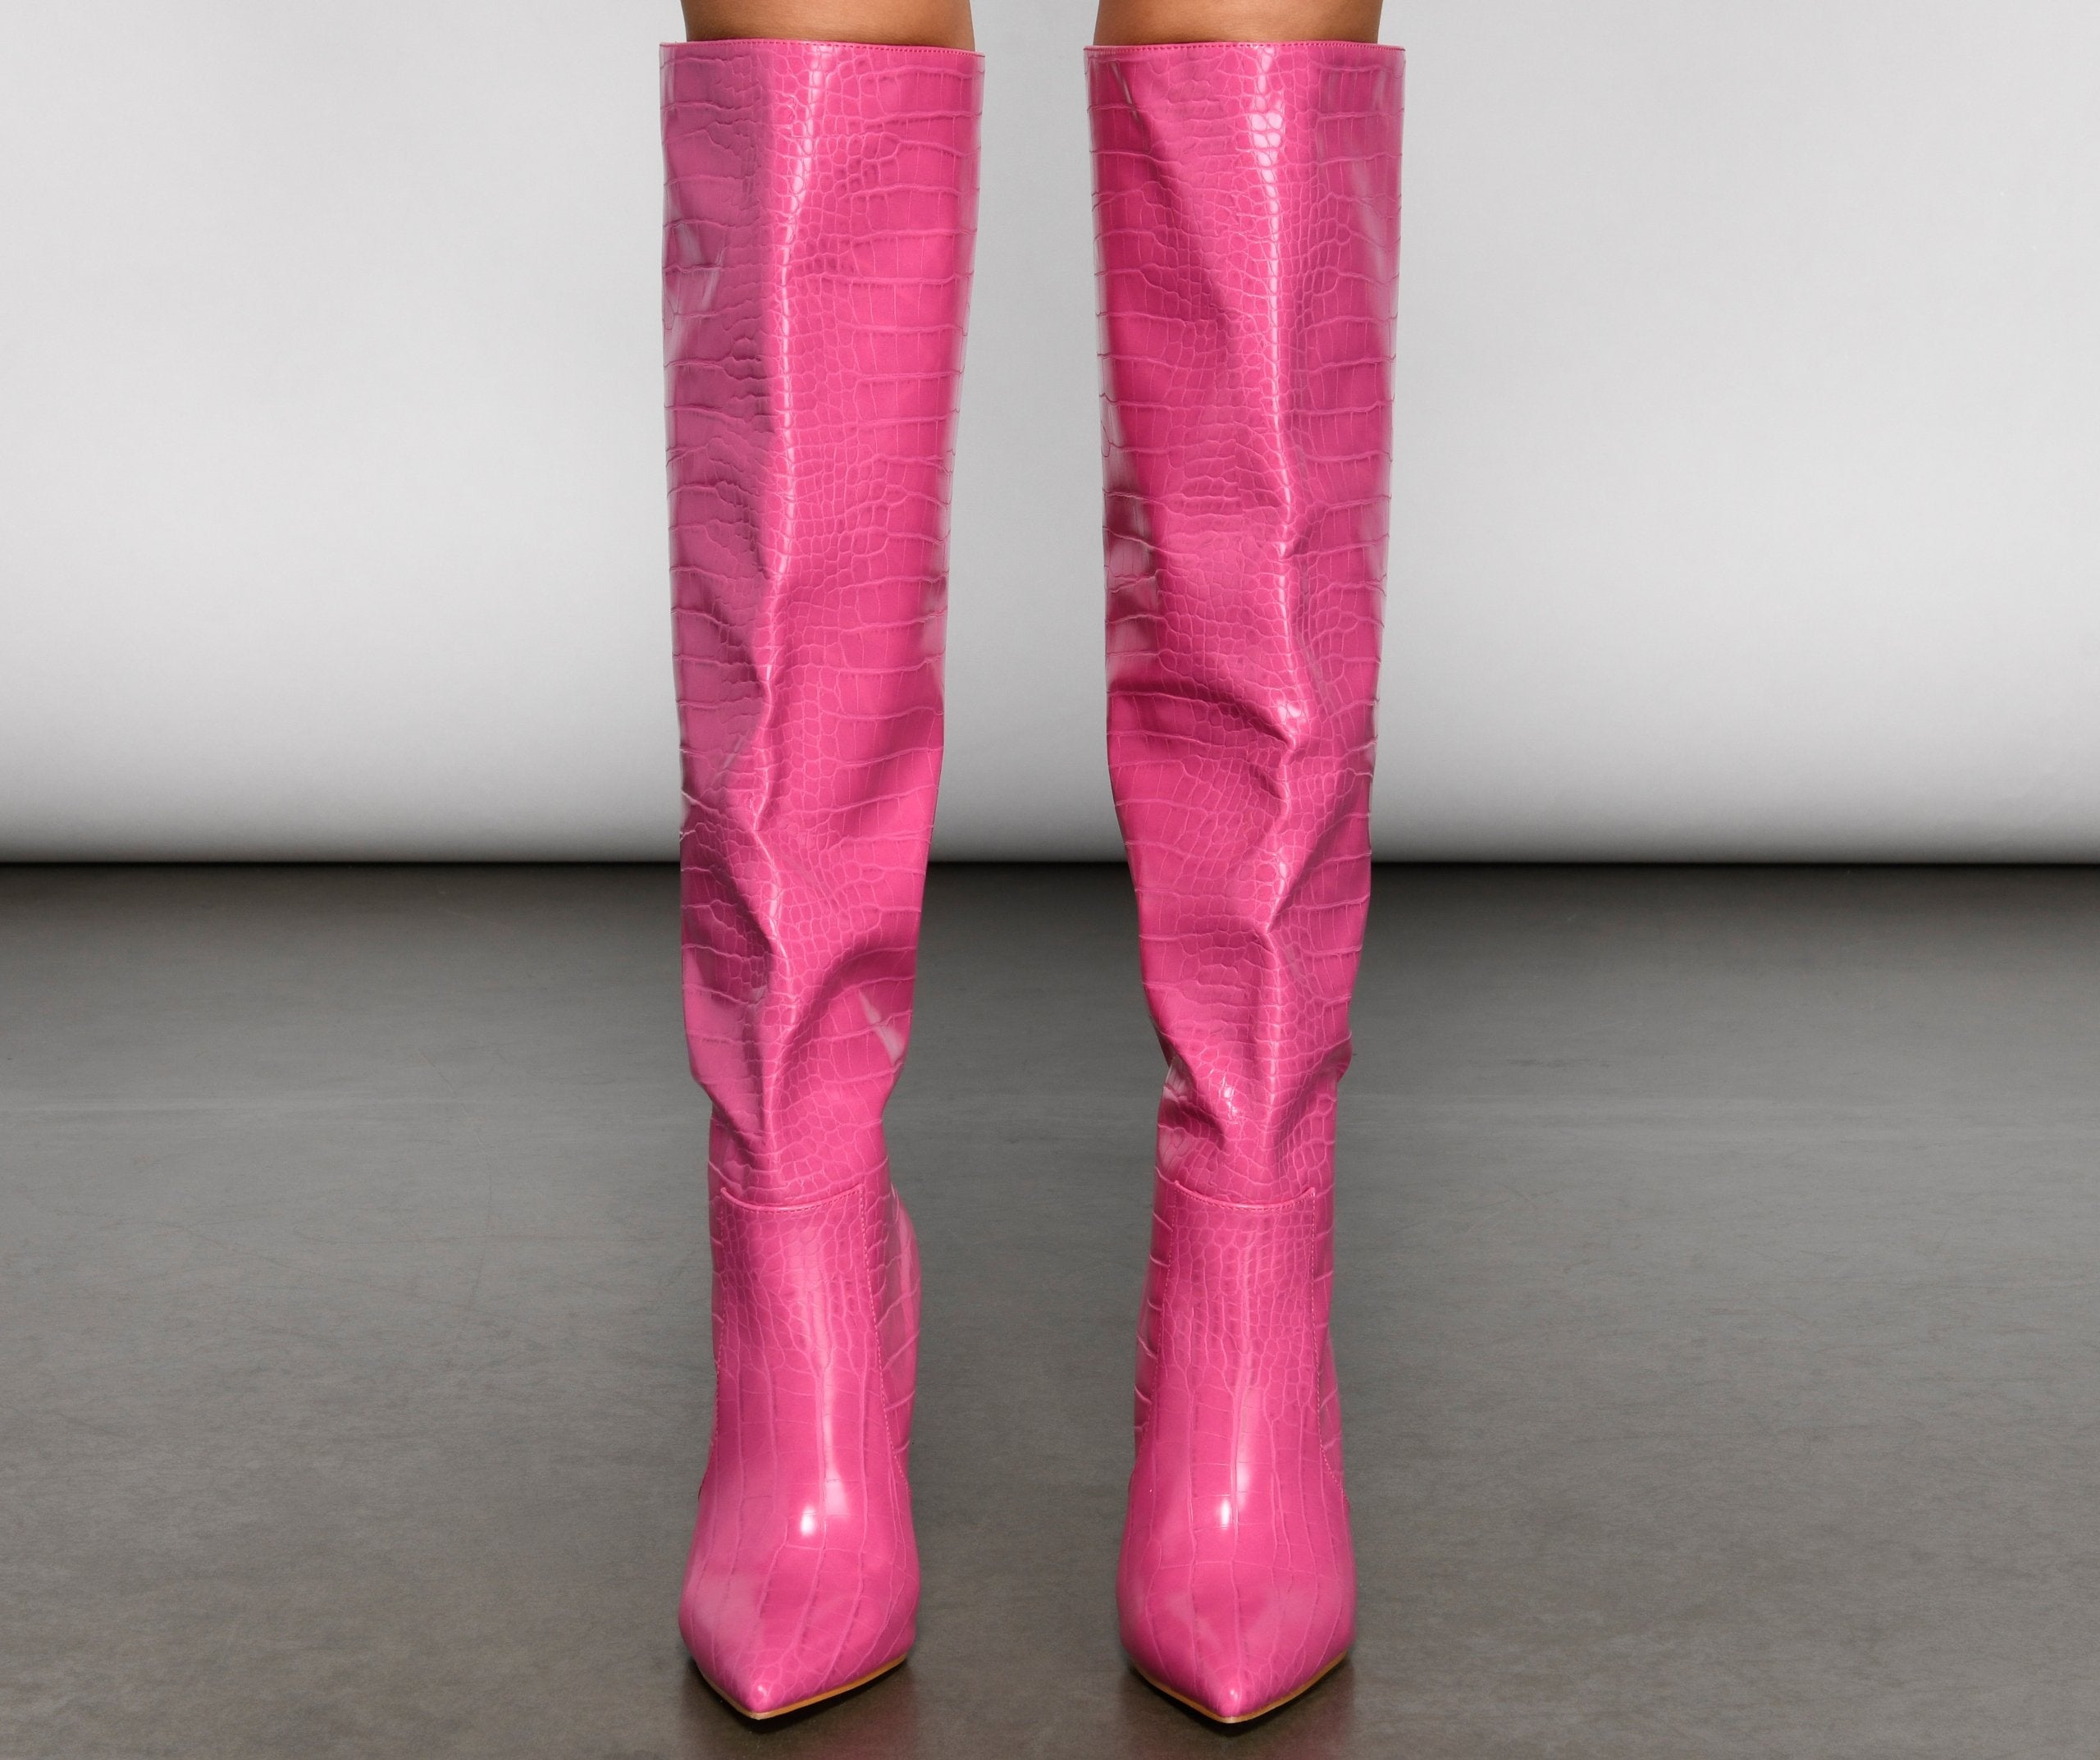 Stylish Gater Knee-High Stiletto Boots - Lady Occasions